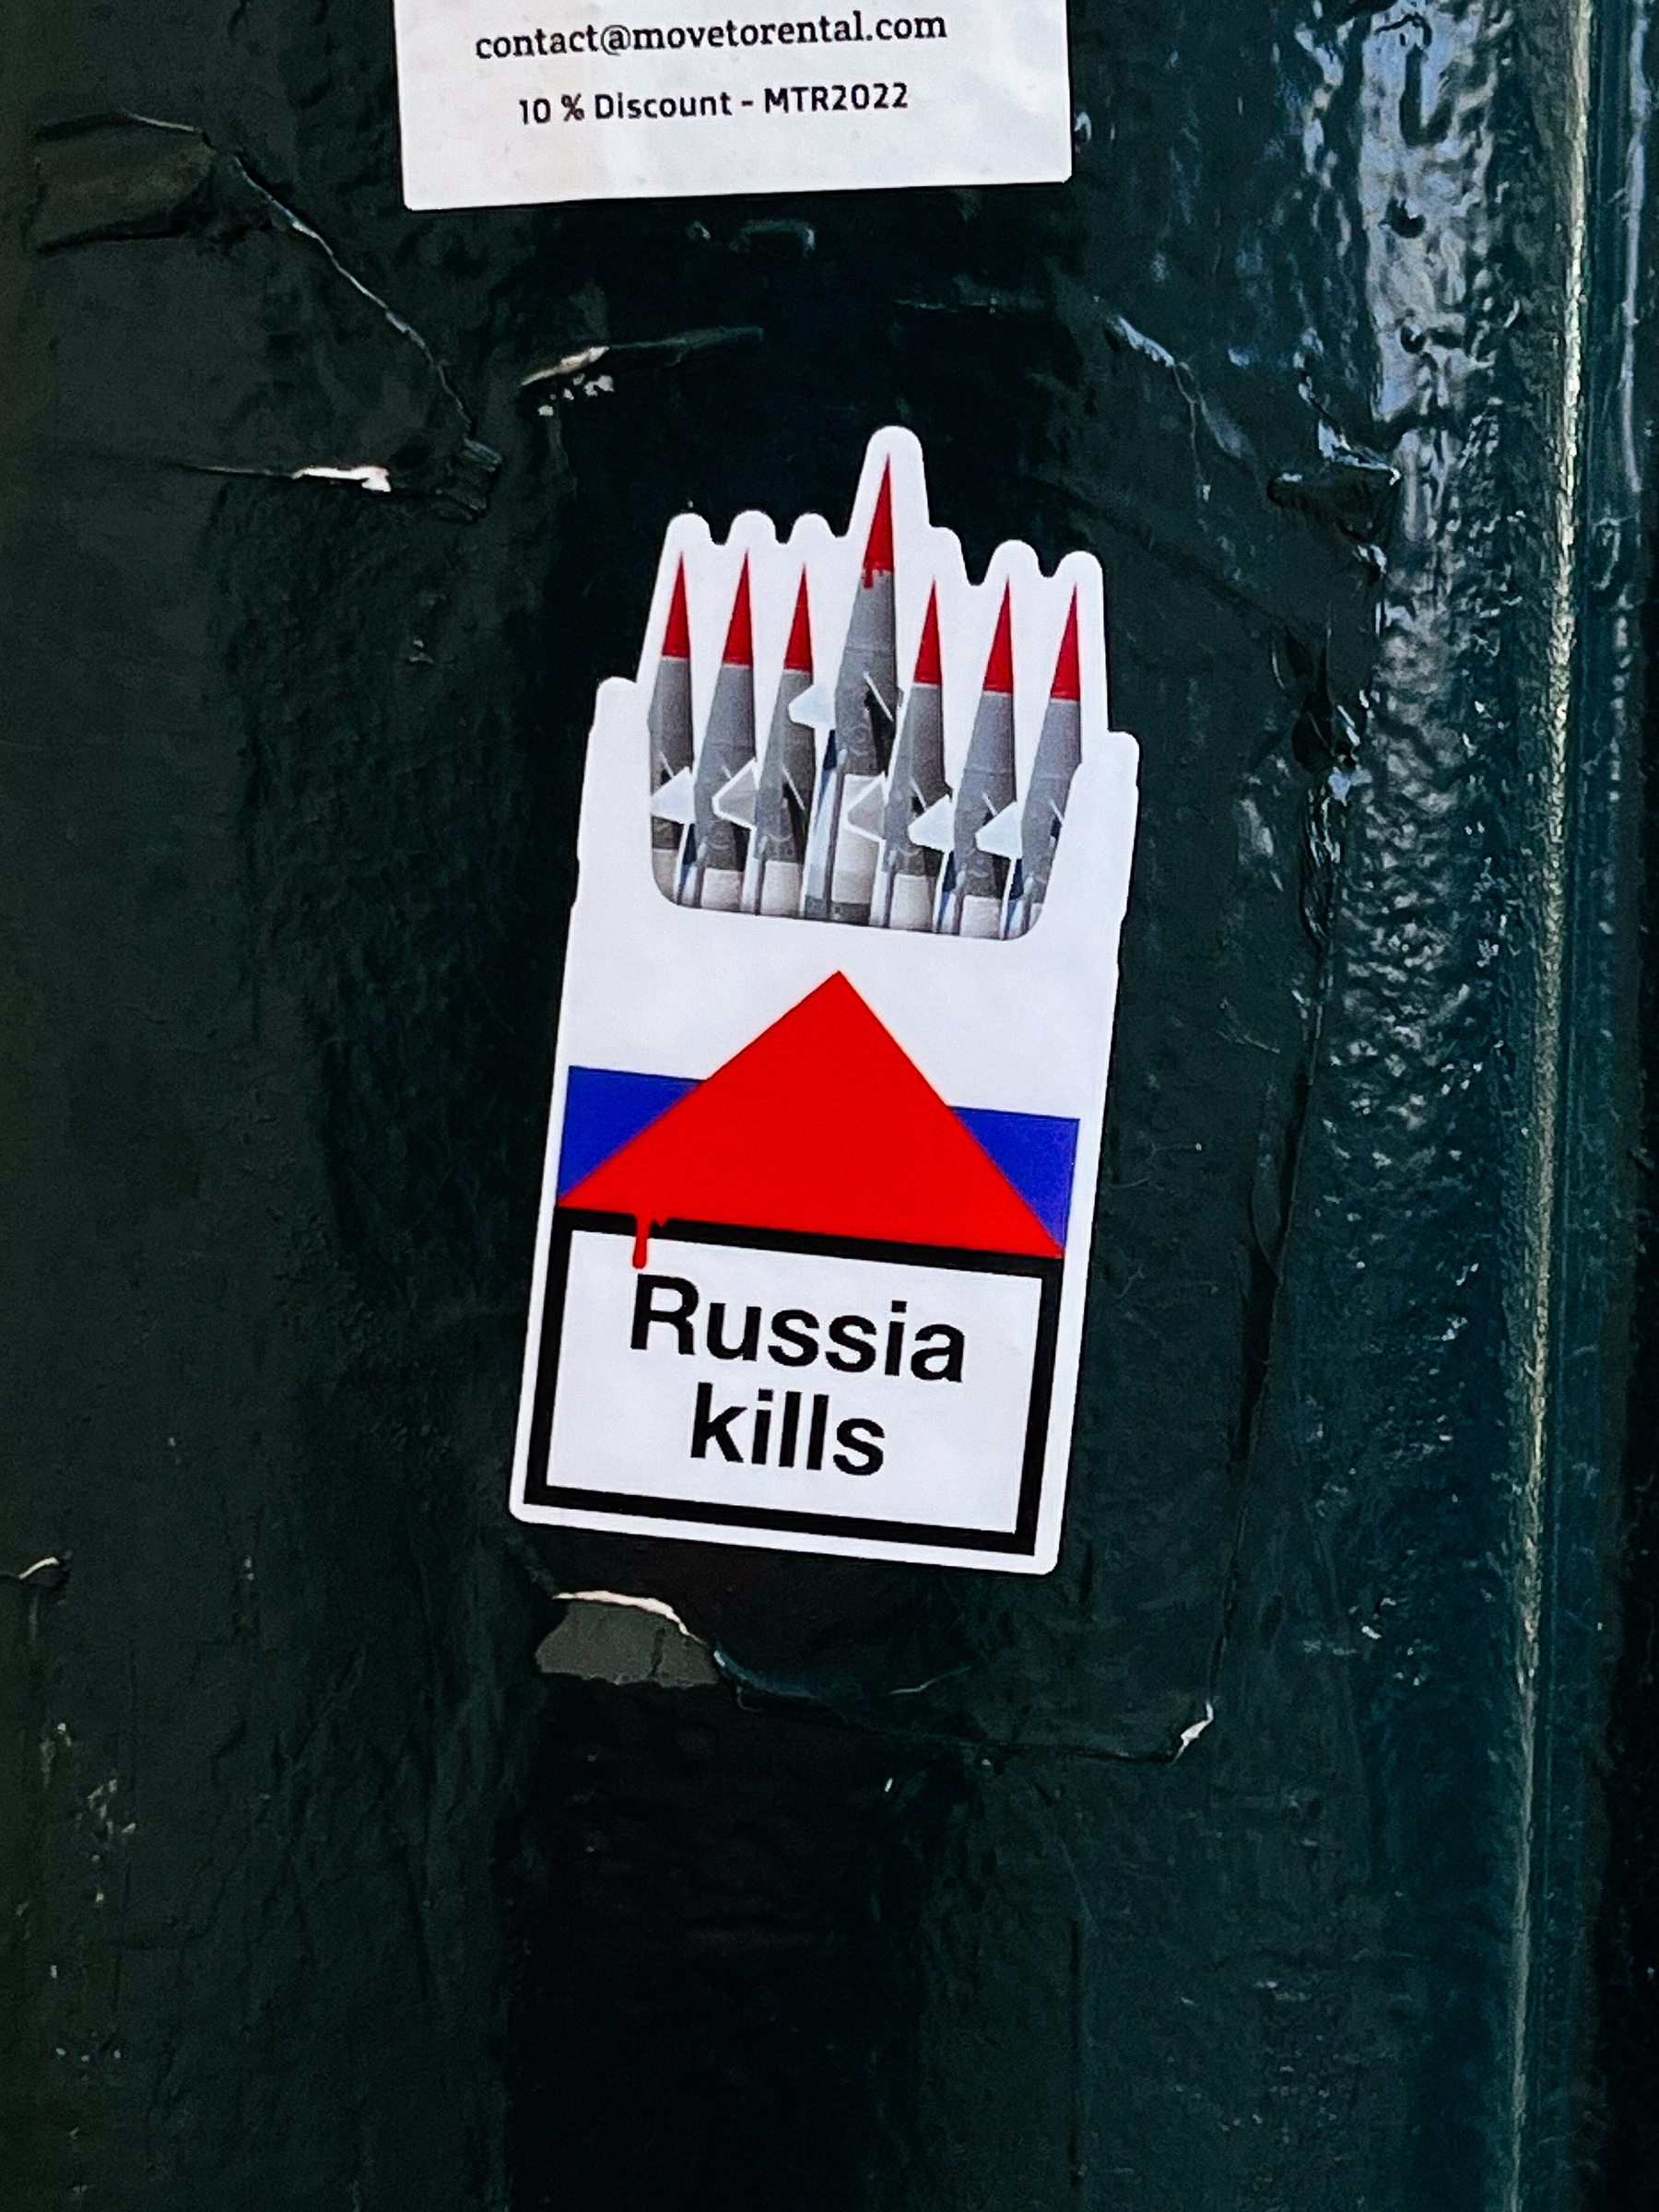 Sticker with a fake pack of cigarettes, with missiles coming out the top instead of cigarettes, and the words “Russia Kills” in the place of the health warning message. 